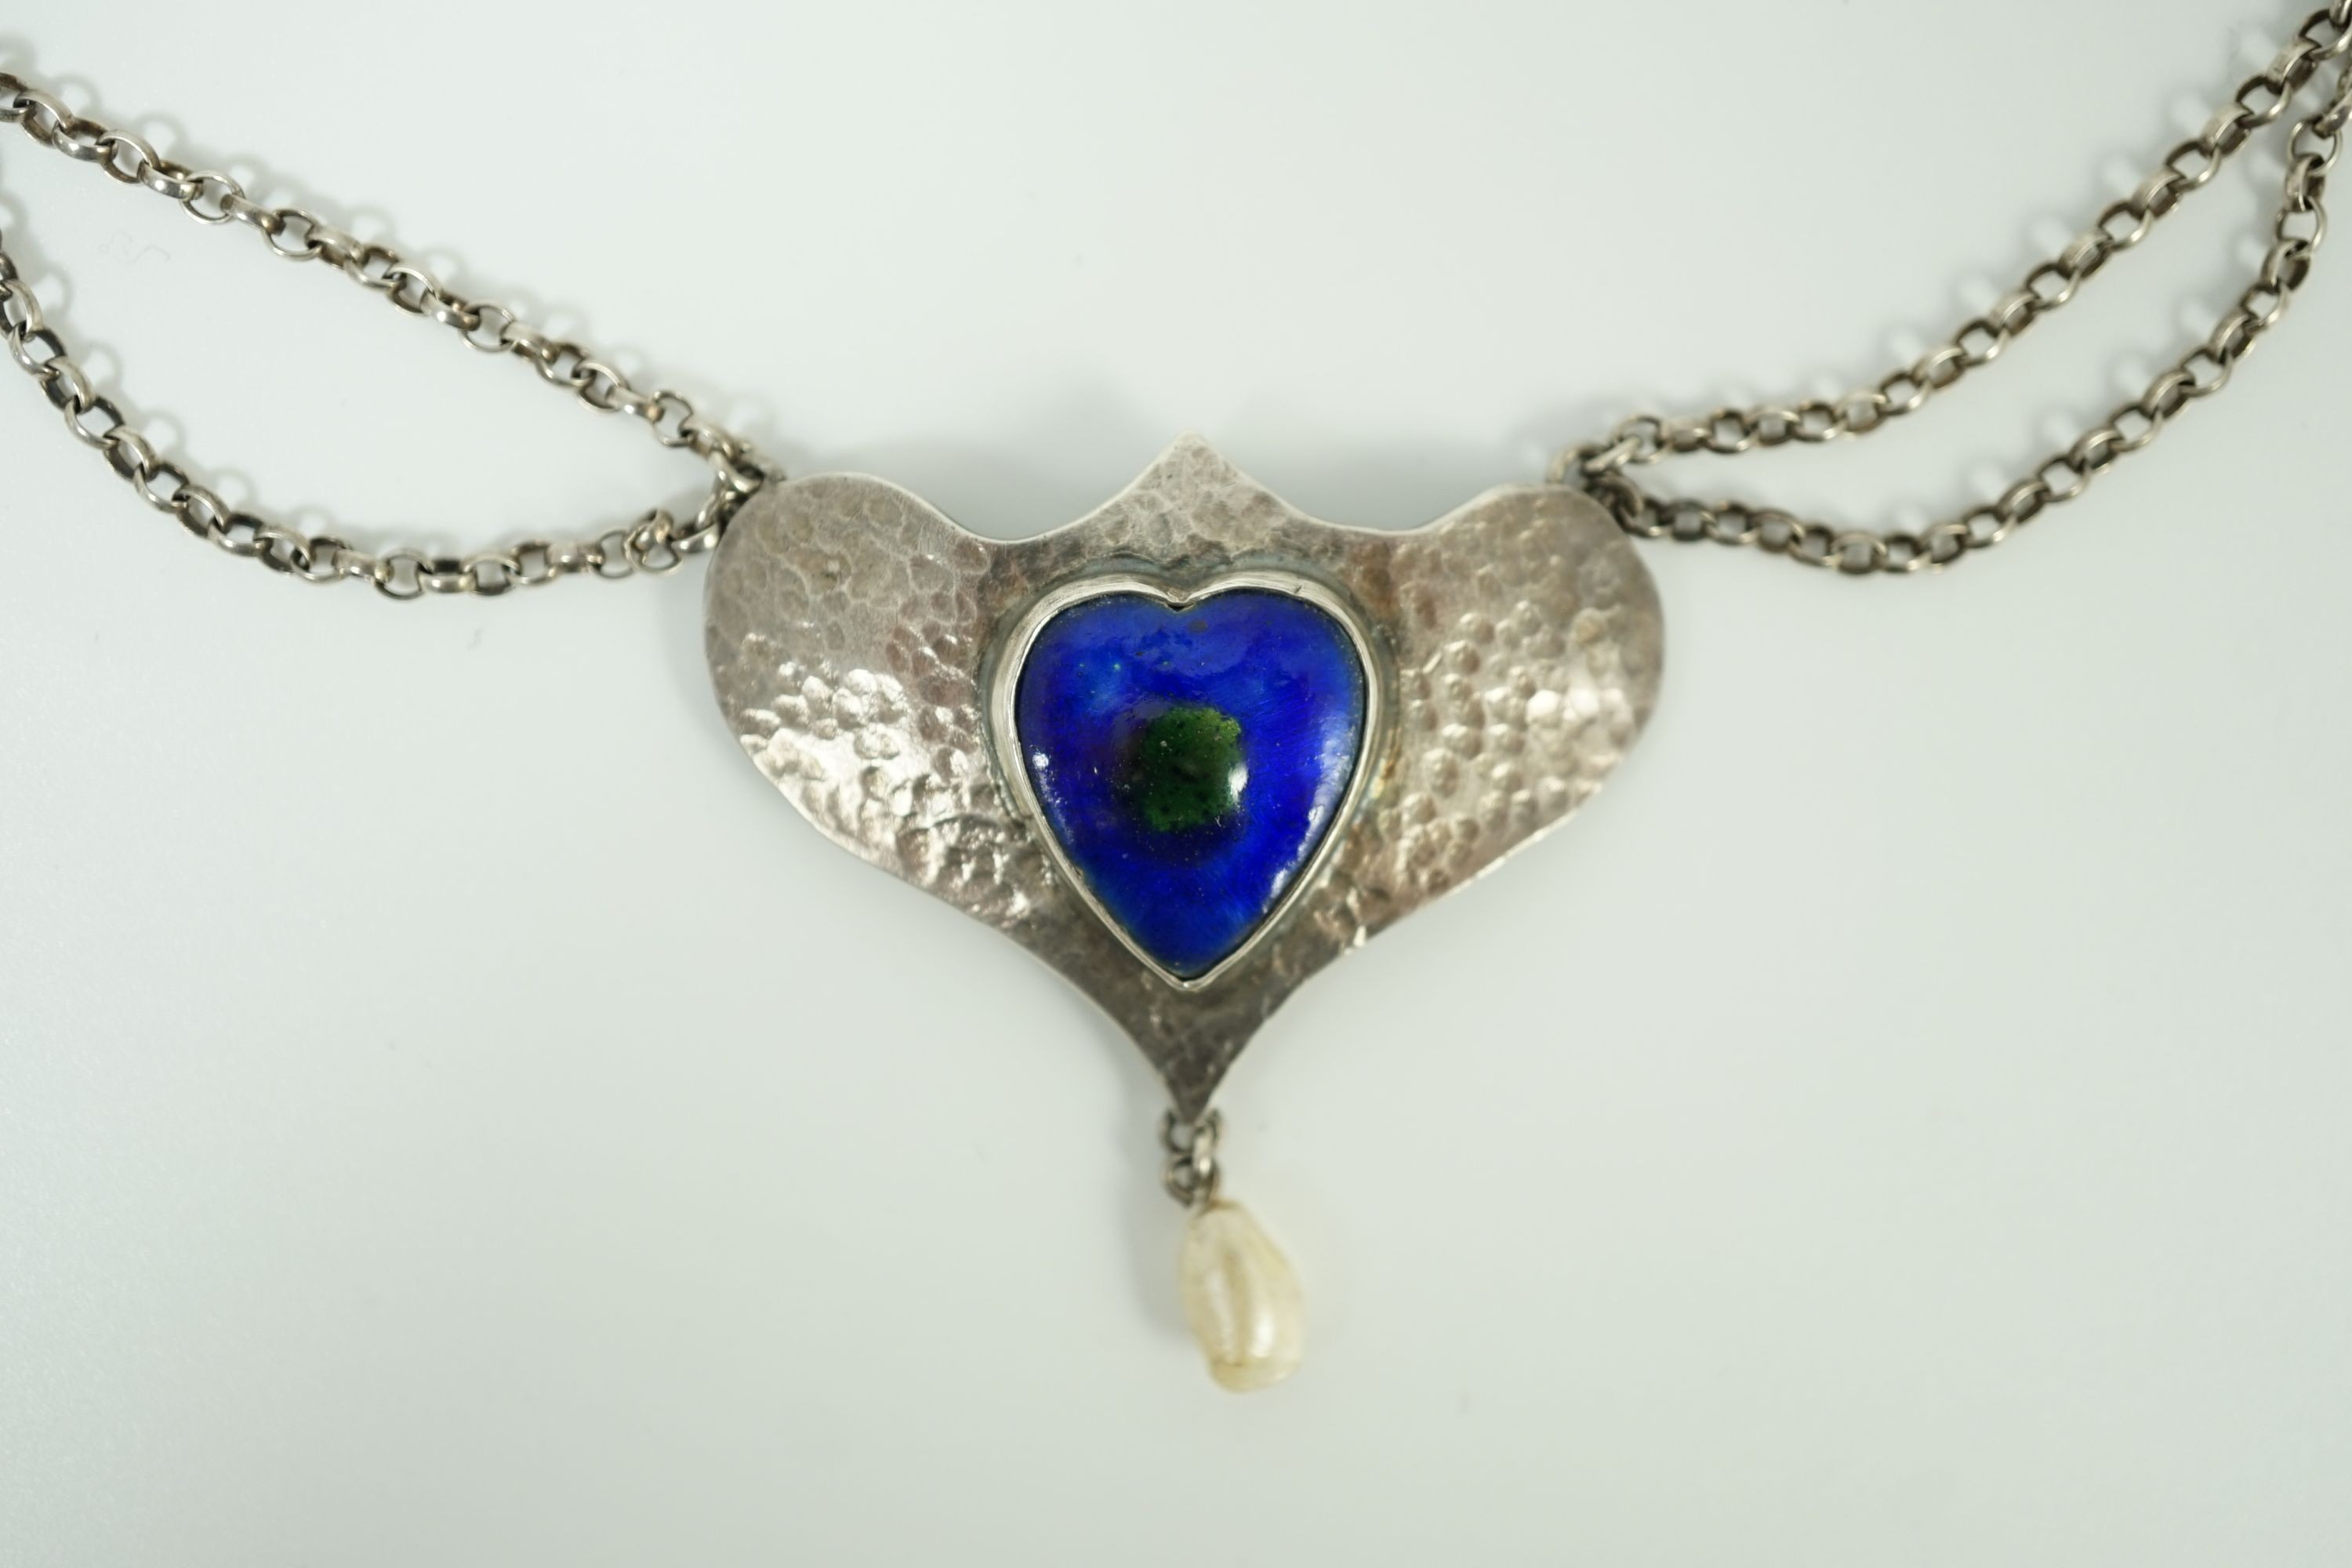 A stylish early 20th century sterling, enamel and baroque drop pearl set necklace